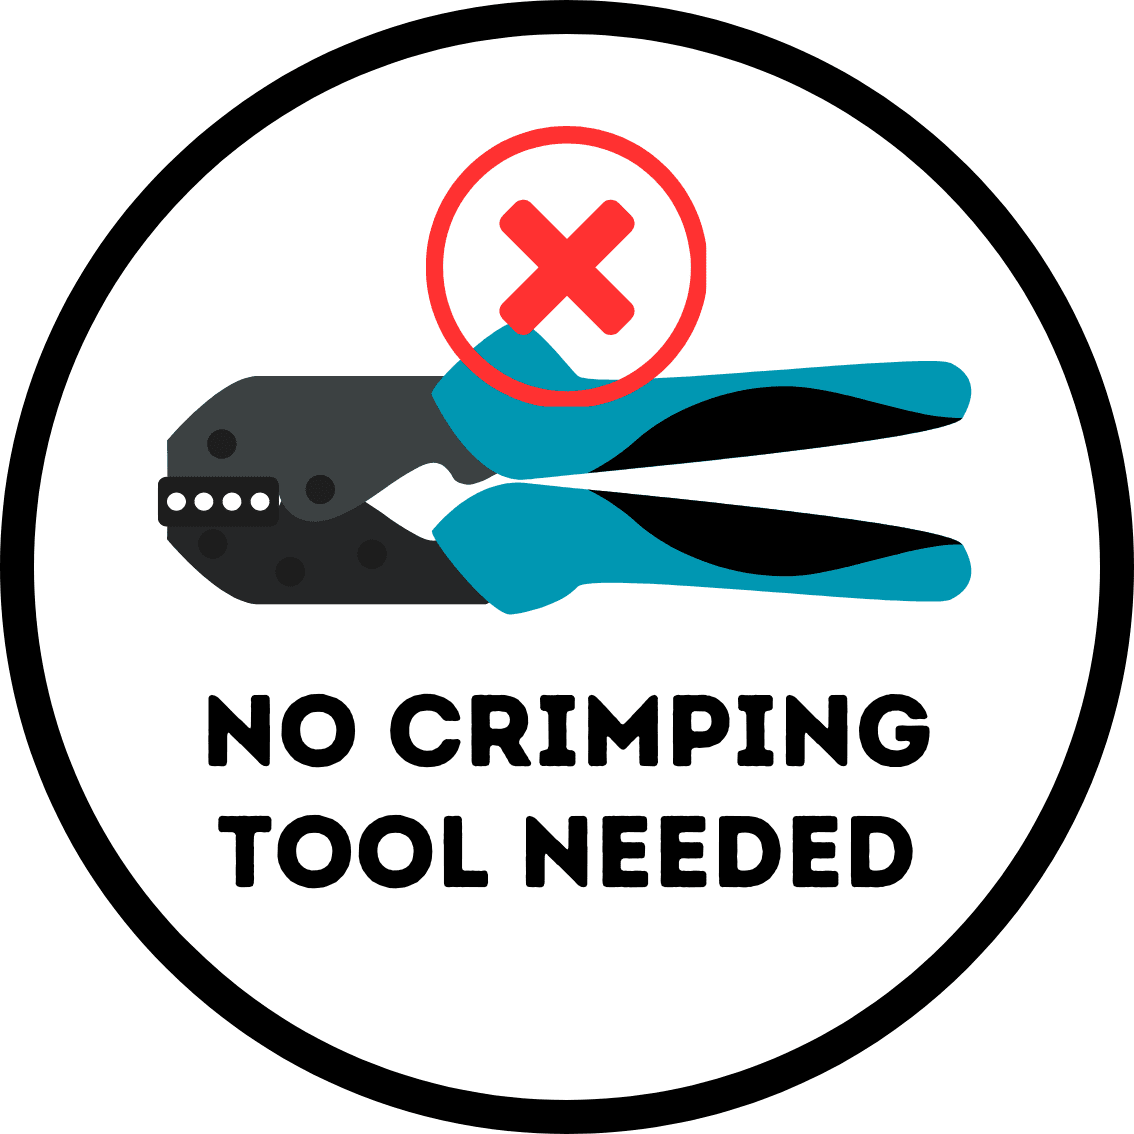 no crimping tool is needed to use a solderstick